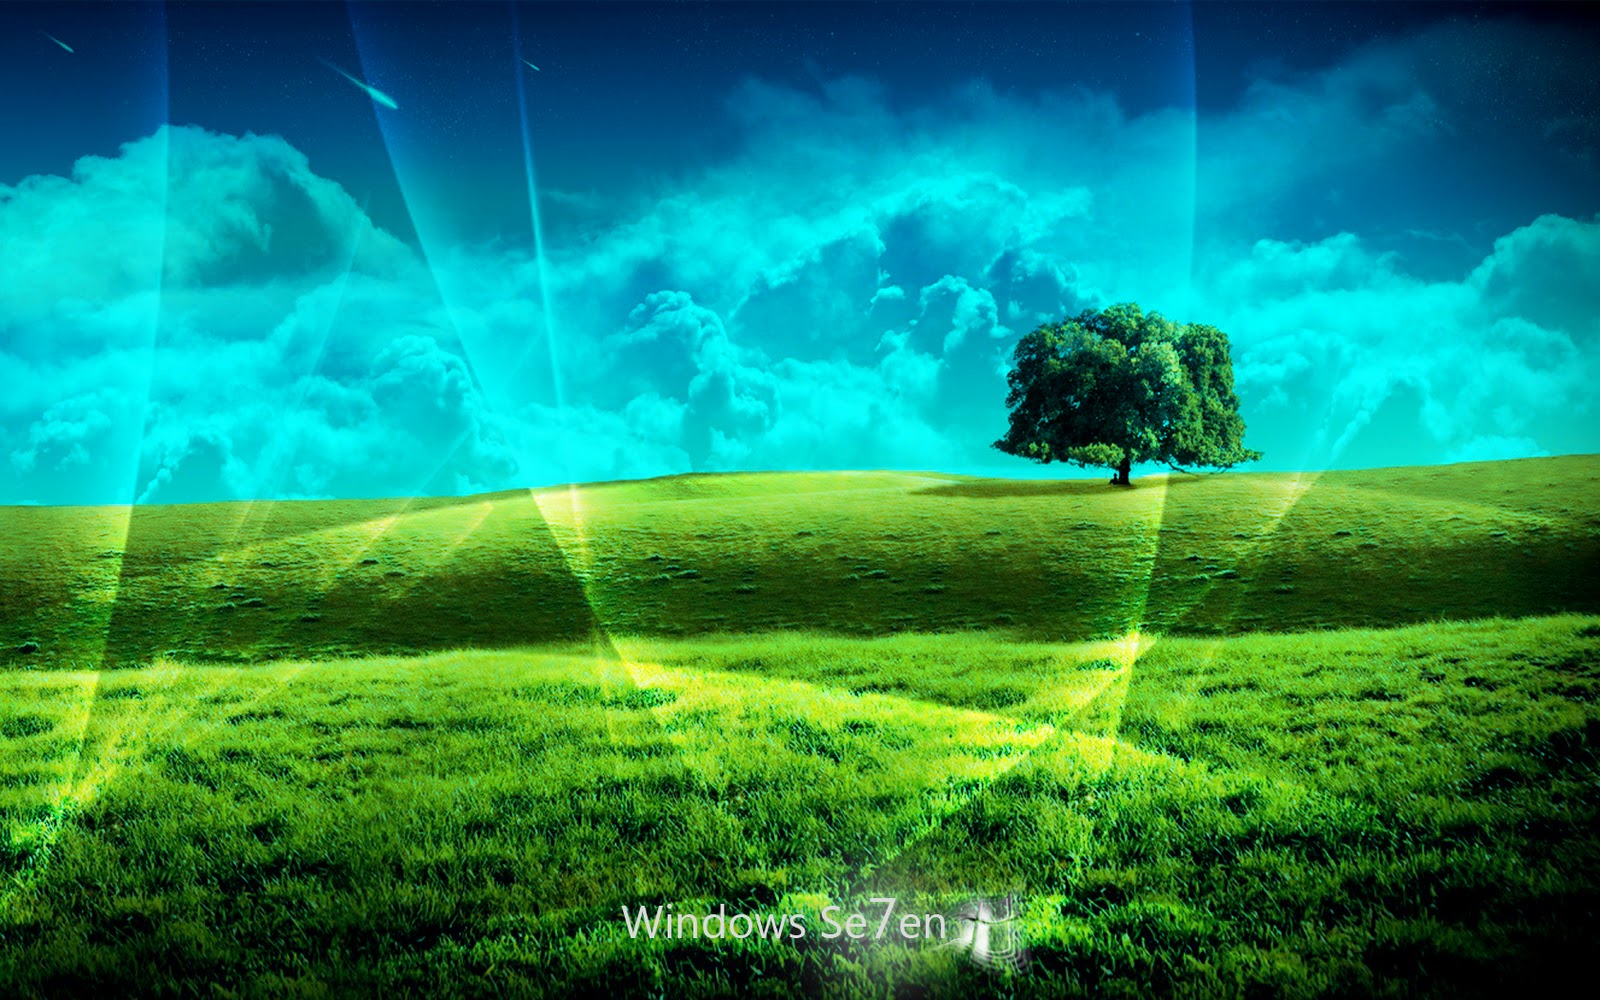 Can See Windows Natural Desktop Best Quality Wallpaper Or